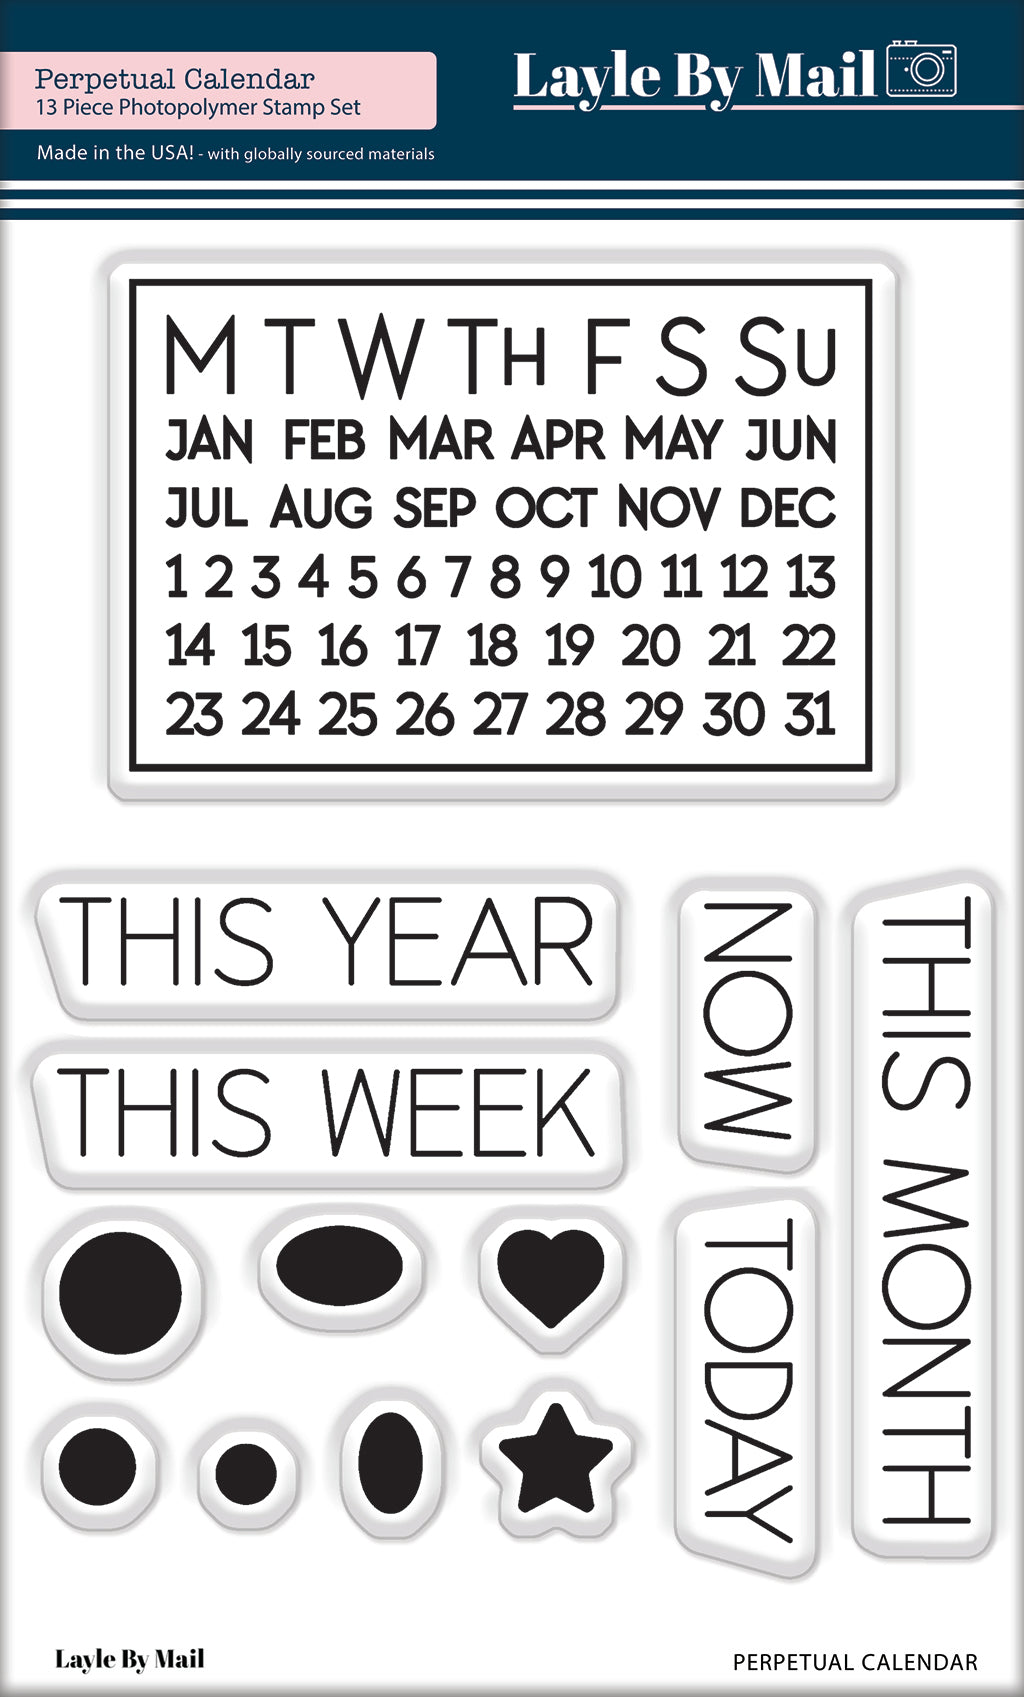 Clear Photopolymer Stamp Sets - Months and Years